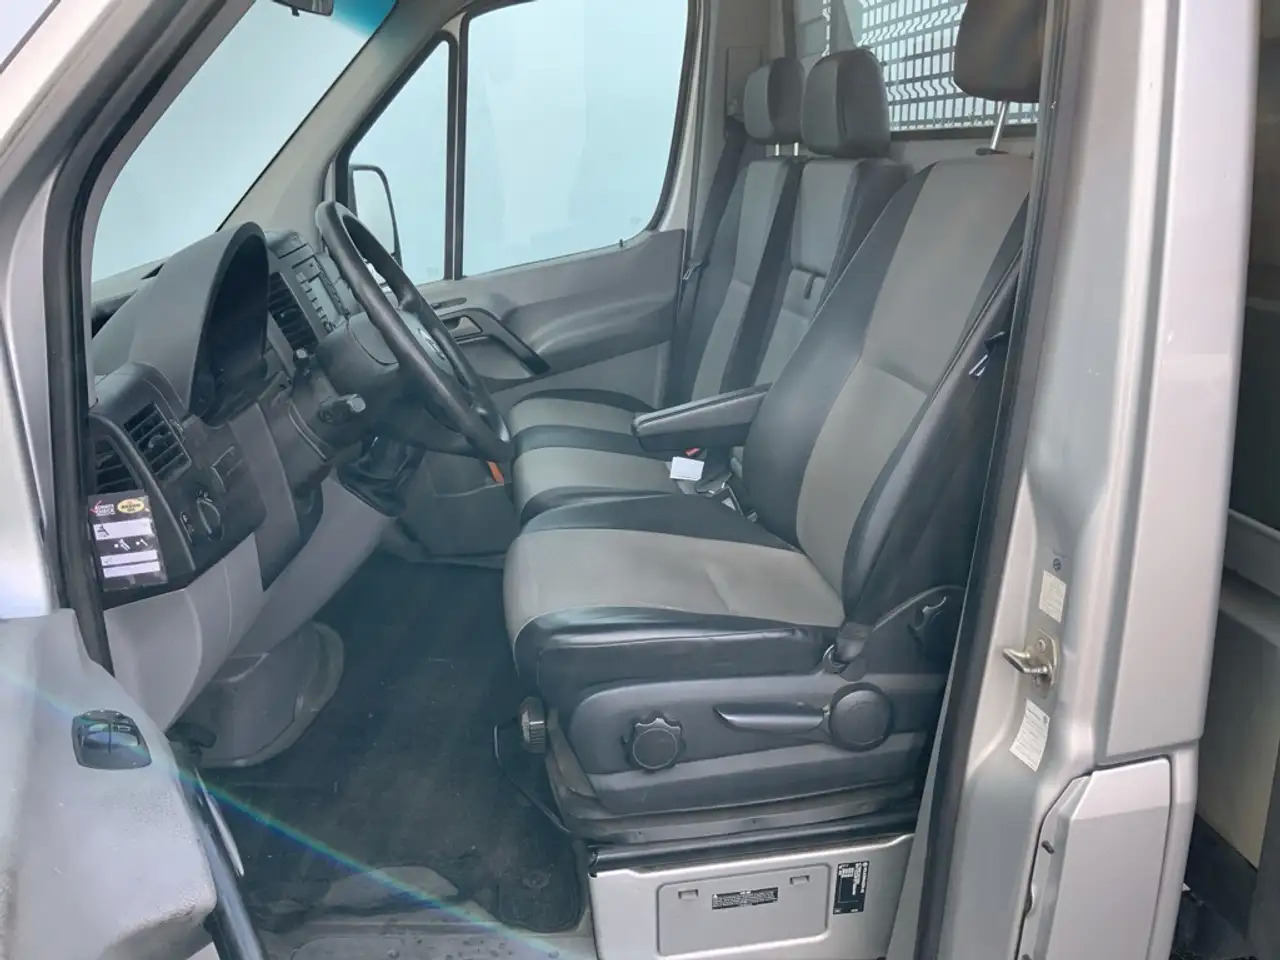 Leasing of Volkswagen Crafter 46 2.0 TDI L2H1 Pick Up Airco Navi Cruise 3 Zits E Volkswagen Crafter 46 2.0 TDI L2H1 Pick Up Airco Navi Cruise 3 Zits E: picture 5